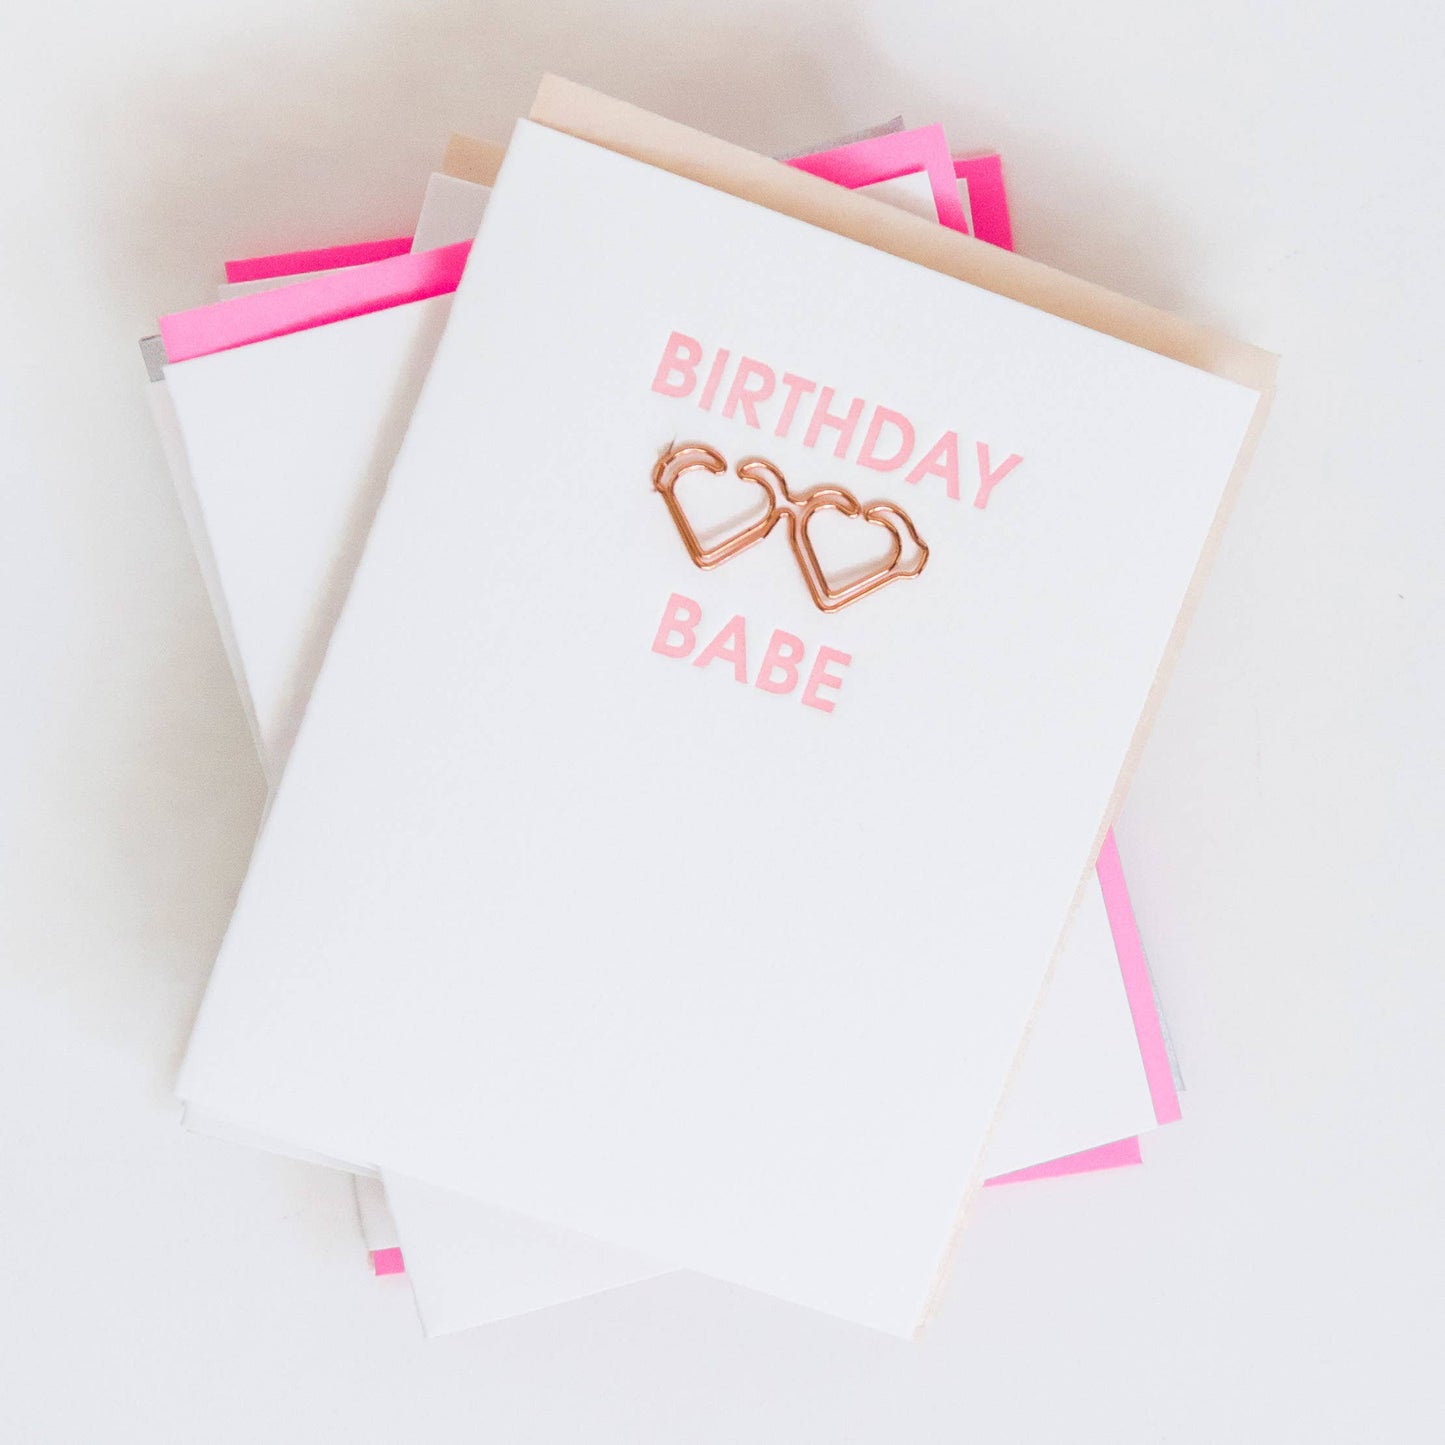 Birthday Babe Sunnies Paper Clip Letterpress Greeting Card